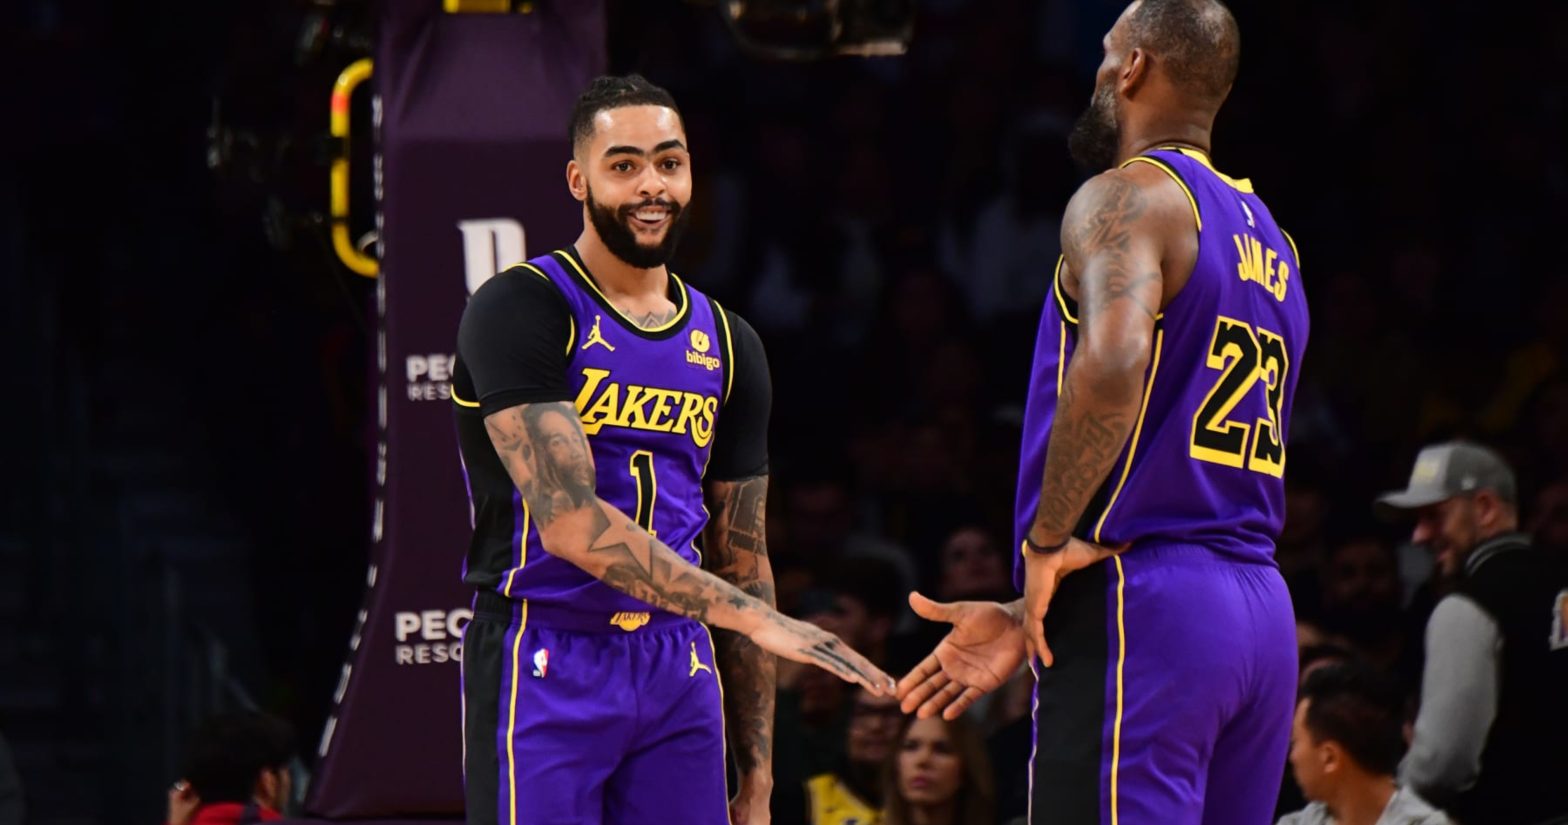 D’Angelo Russell’s Clutch Game Stuns NBA Fans as LeBron, Lakers Beat Zion, Pelicans